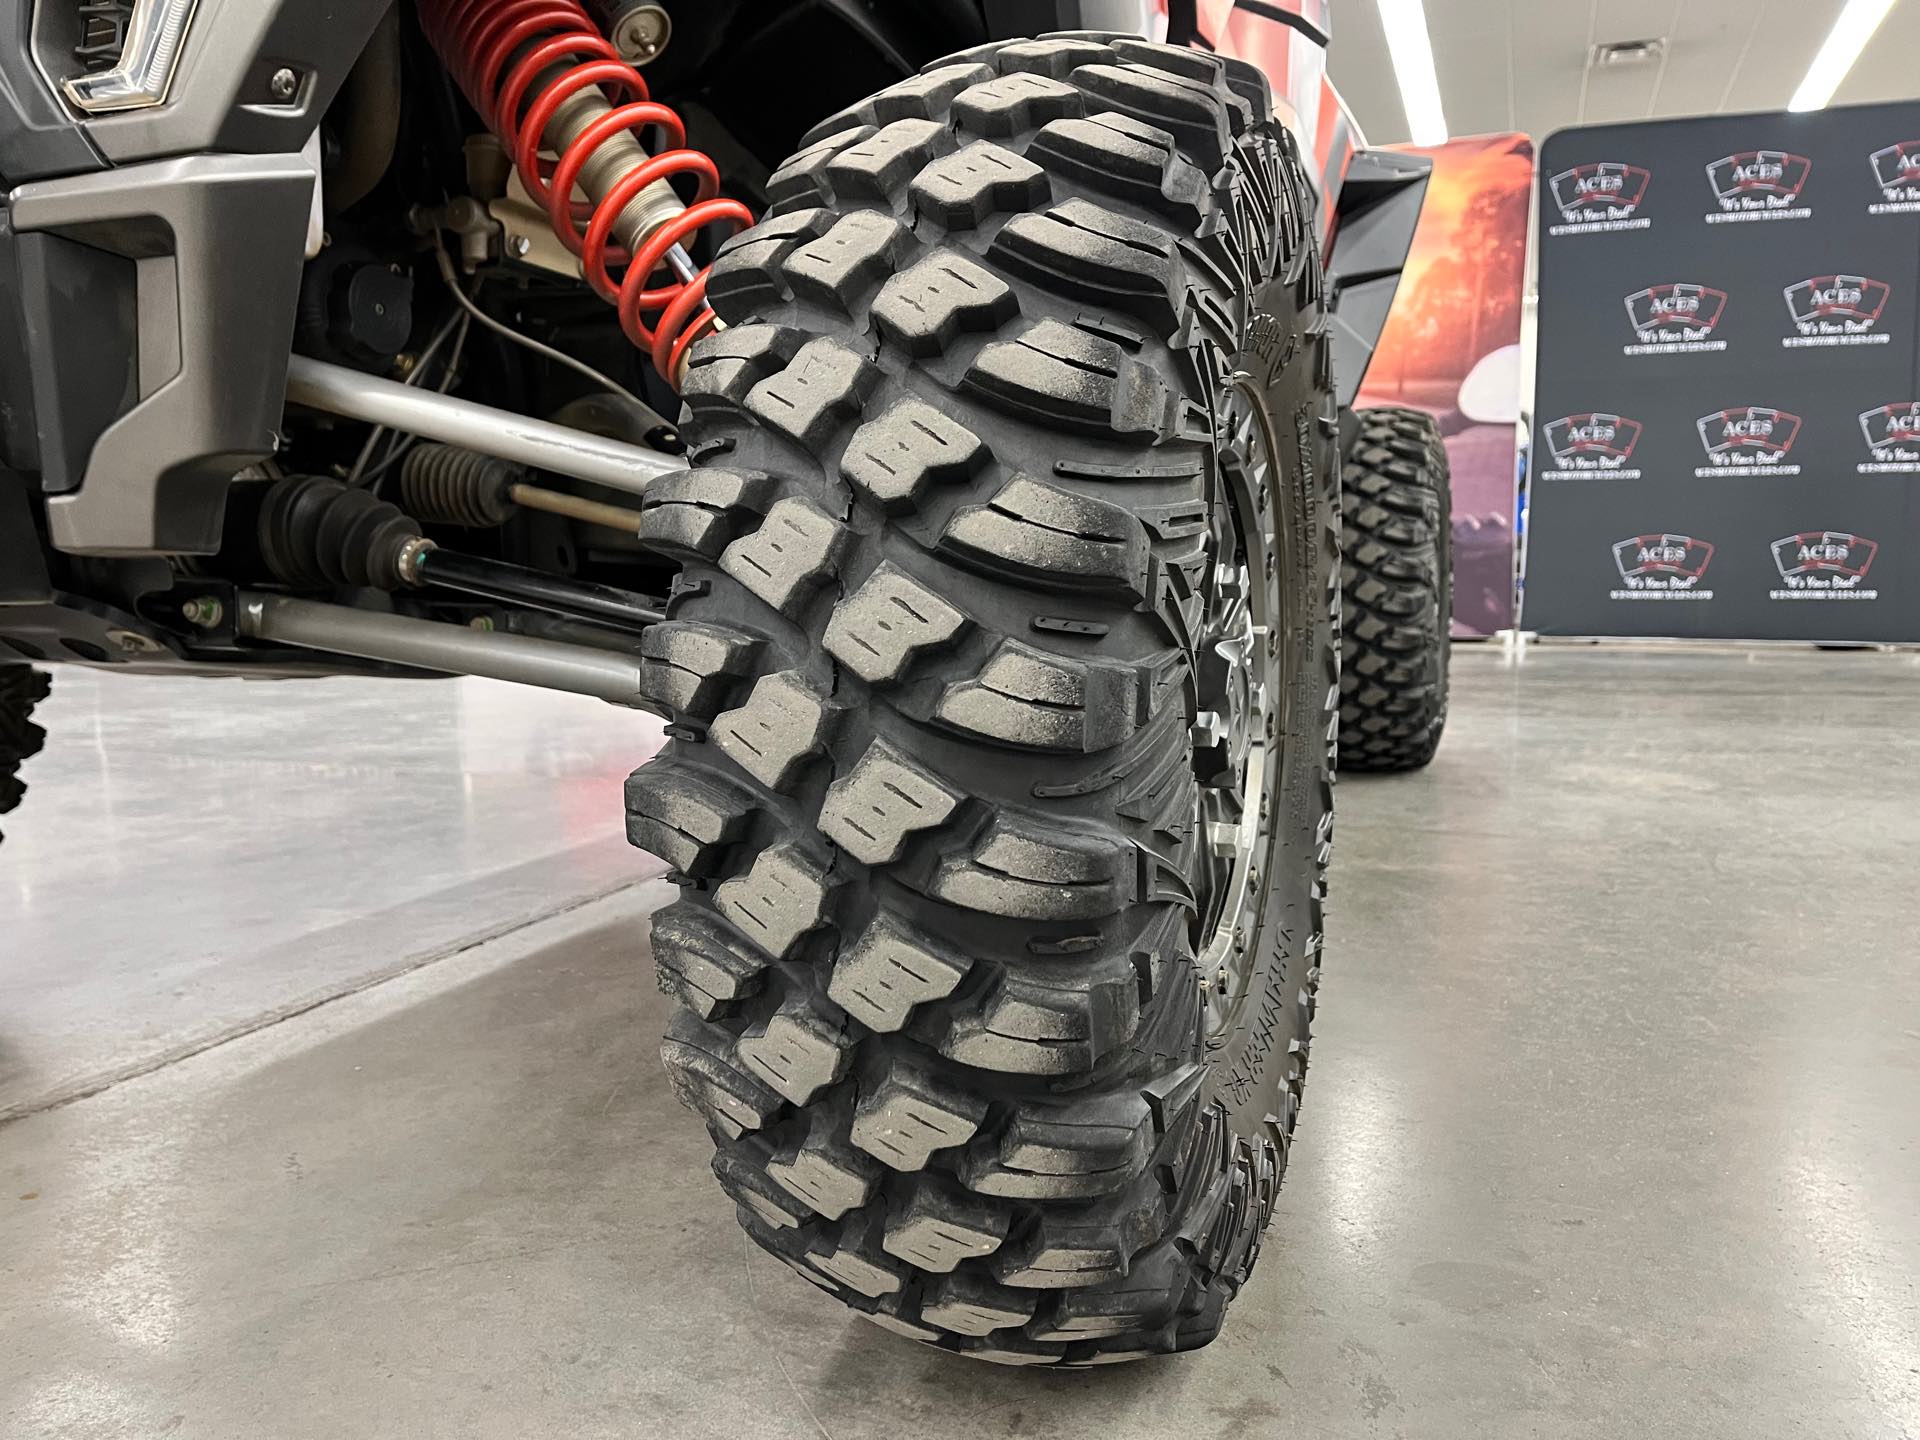 2022 Polaris RZR XP 1000 Trails and Rocks Edition at Aces Motorcycles - Denver